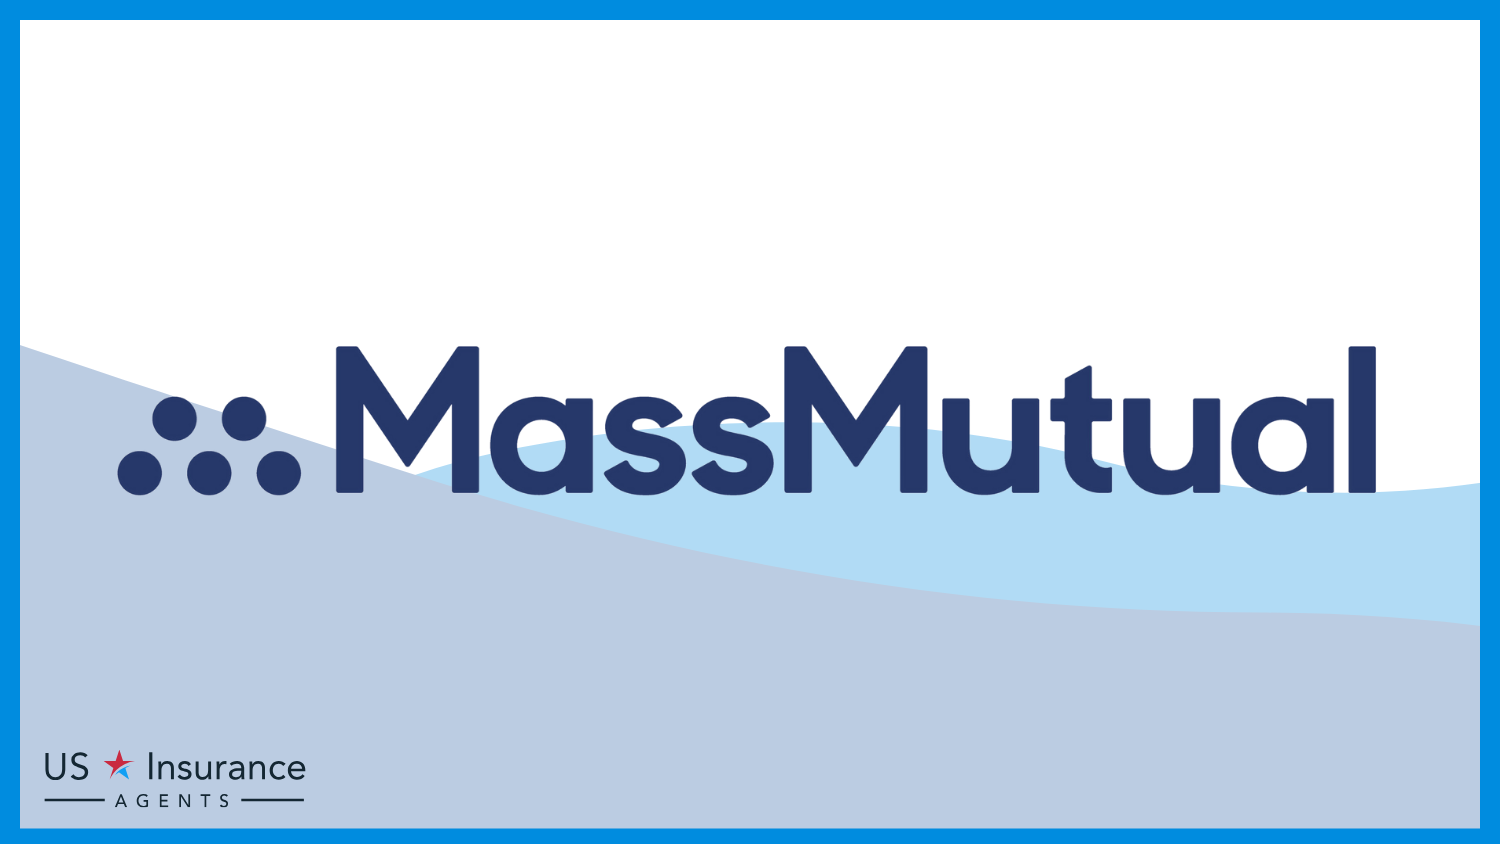 MassMutual: Best Life Insurance for People With Down Syndrome